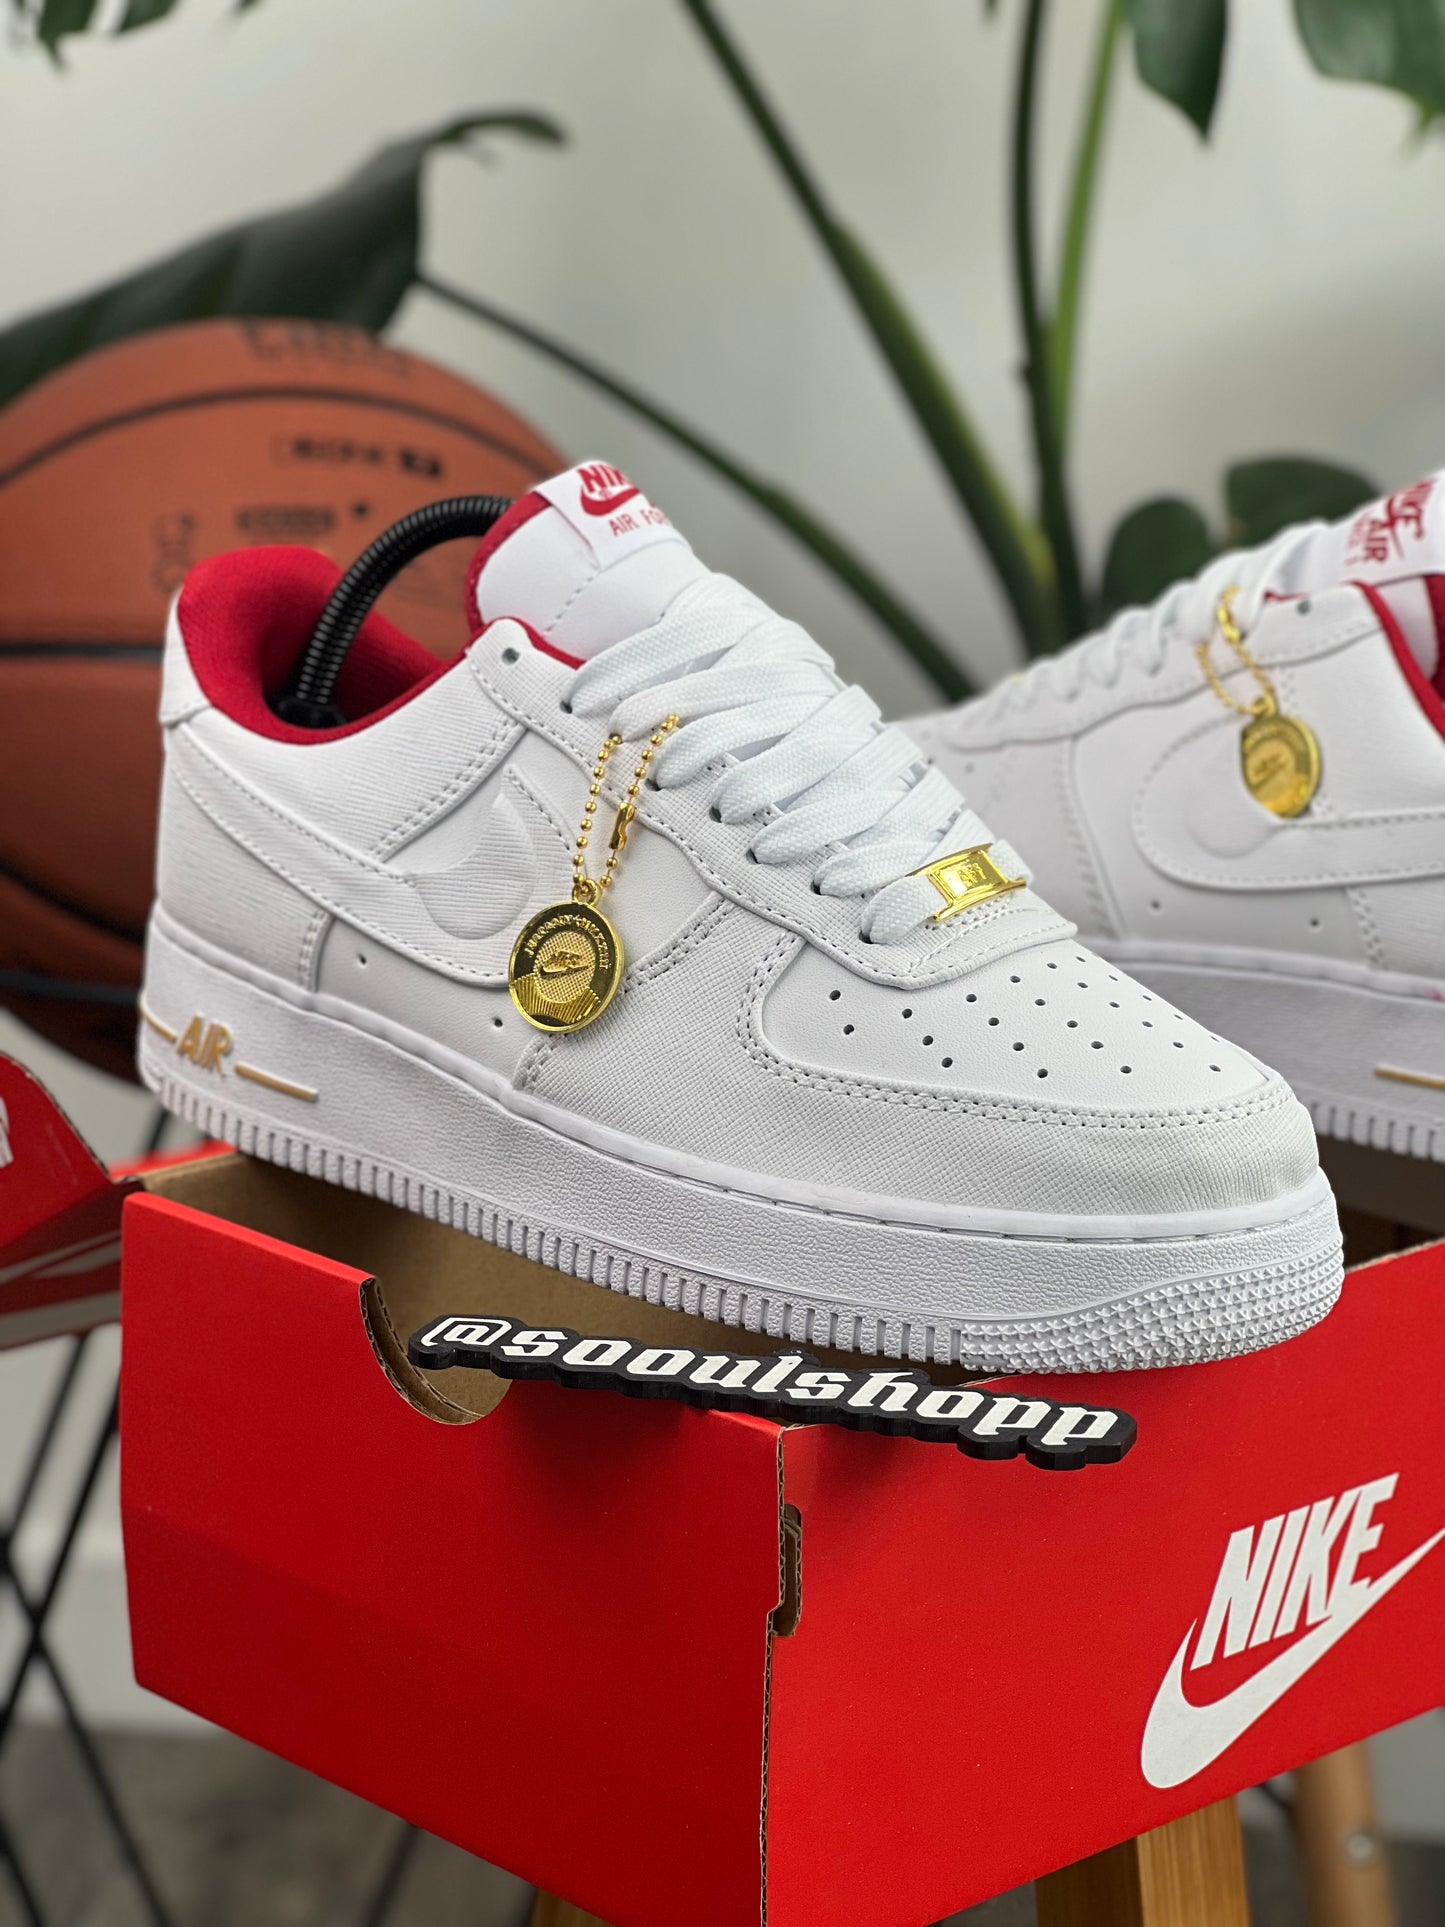 Air Force 1 Low Just Do It Hangtag